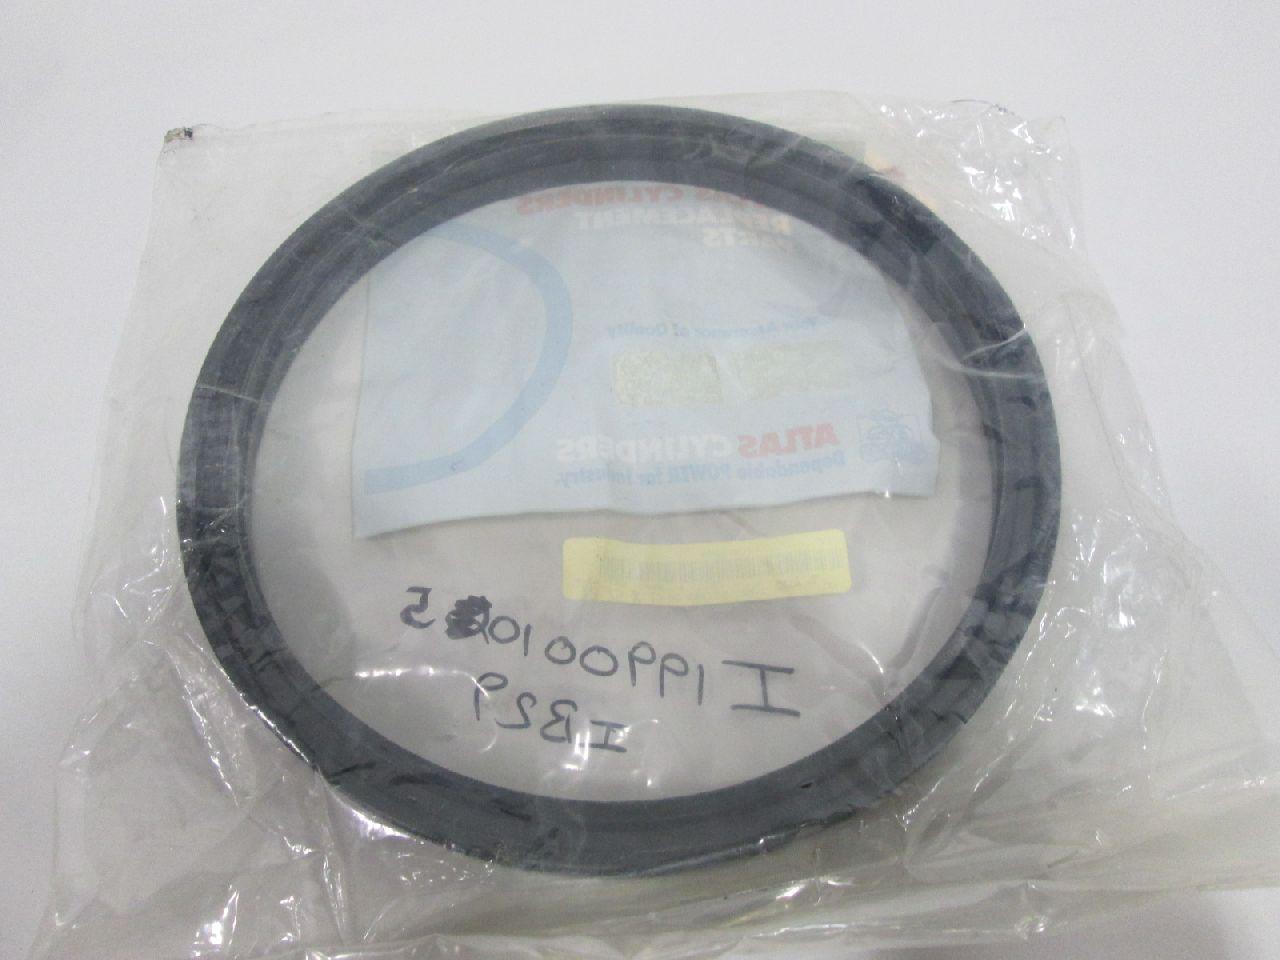 Lot 2 New Atlas X-162 18752 Cylinder Piston Seal Ring 12in Bore 